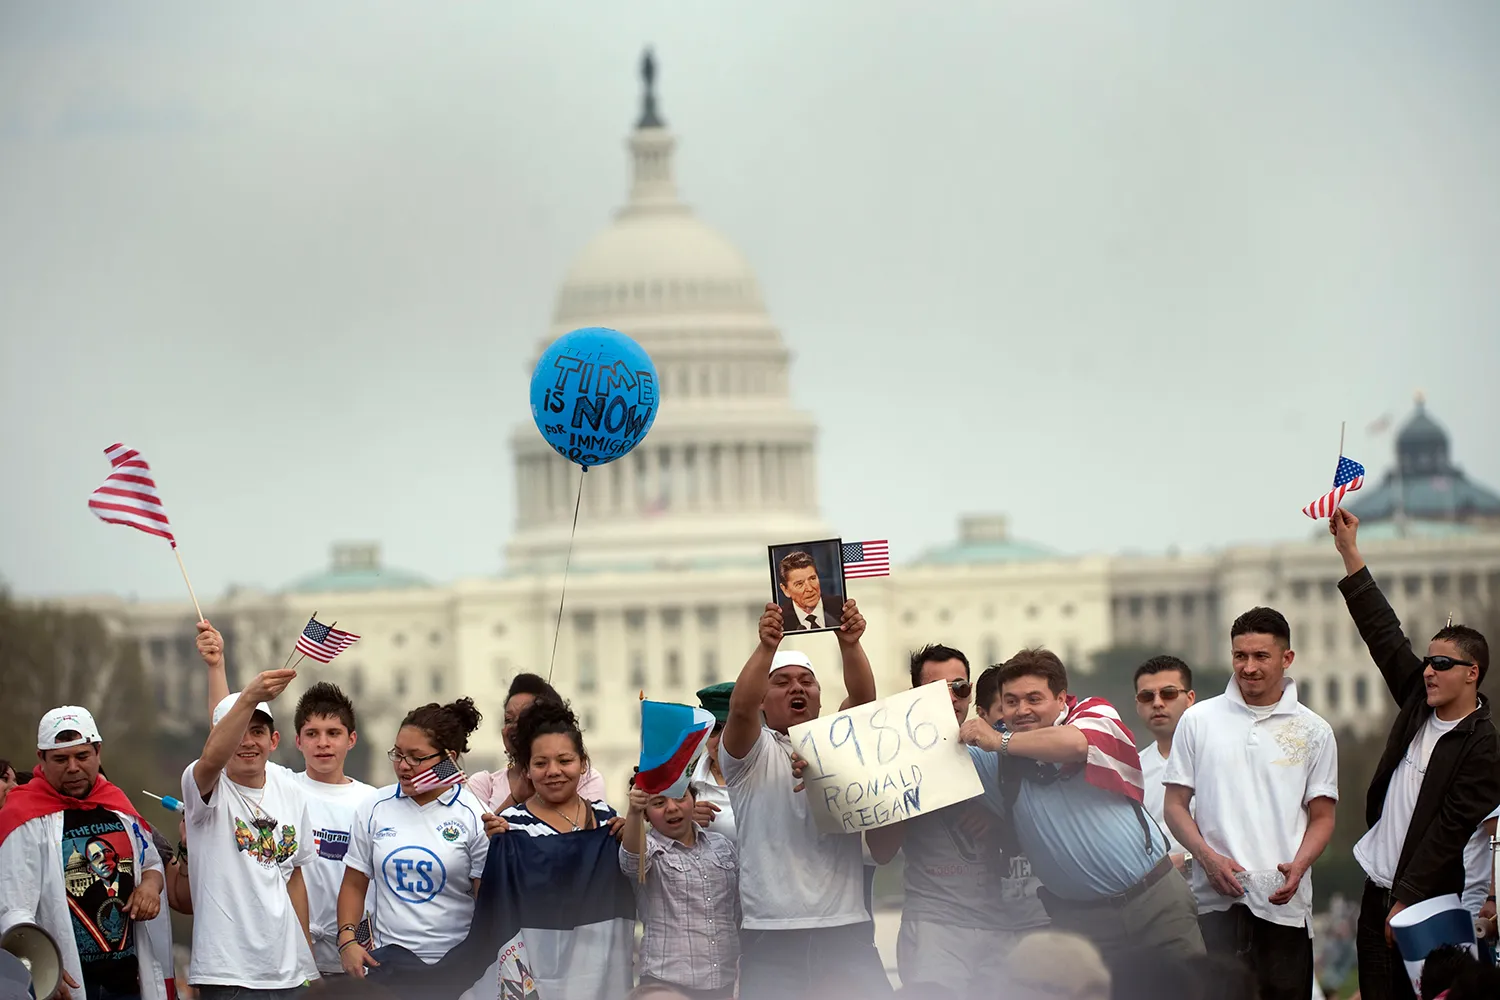 About a dozen people wave flags and signs as they attend a rally in support of immigration rights on the National Mall in Washington, D.C. The white dome of the U.S. Capitol building looms behind them against a pale cloudy sky.